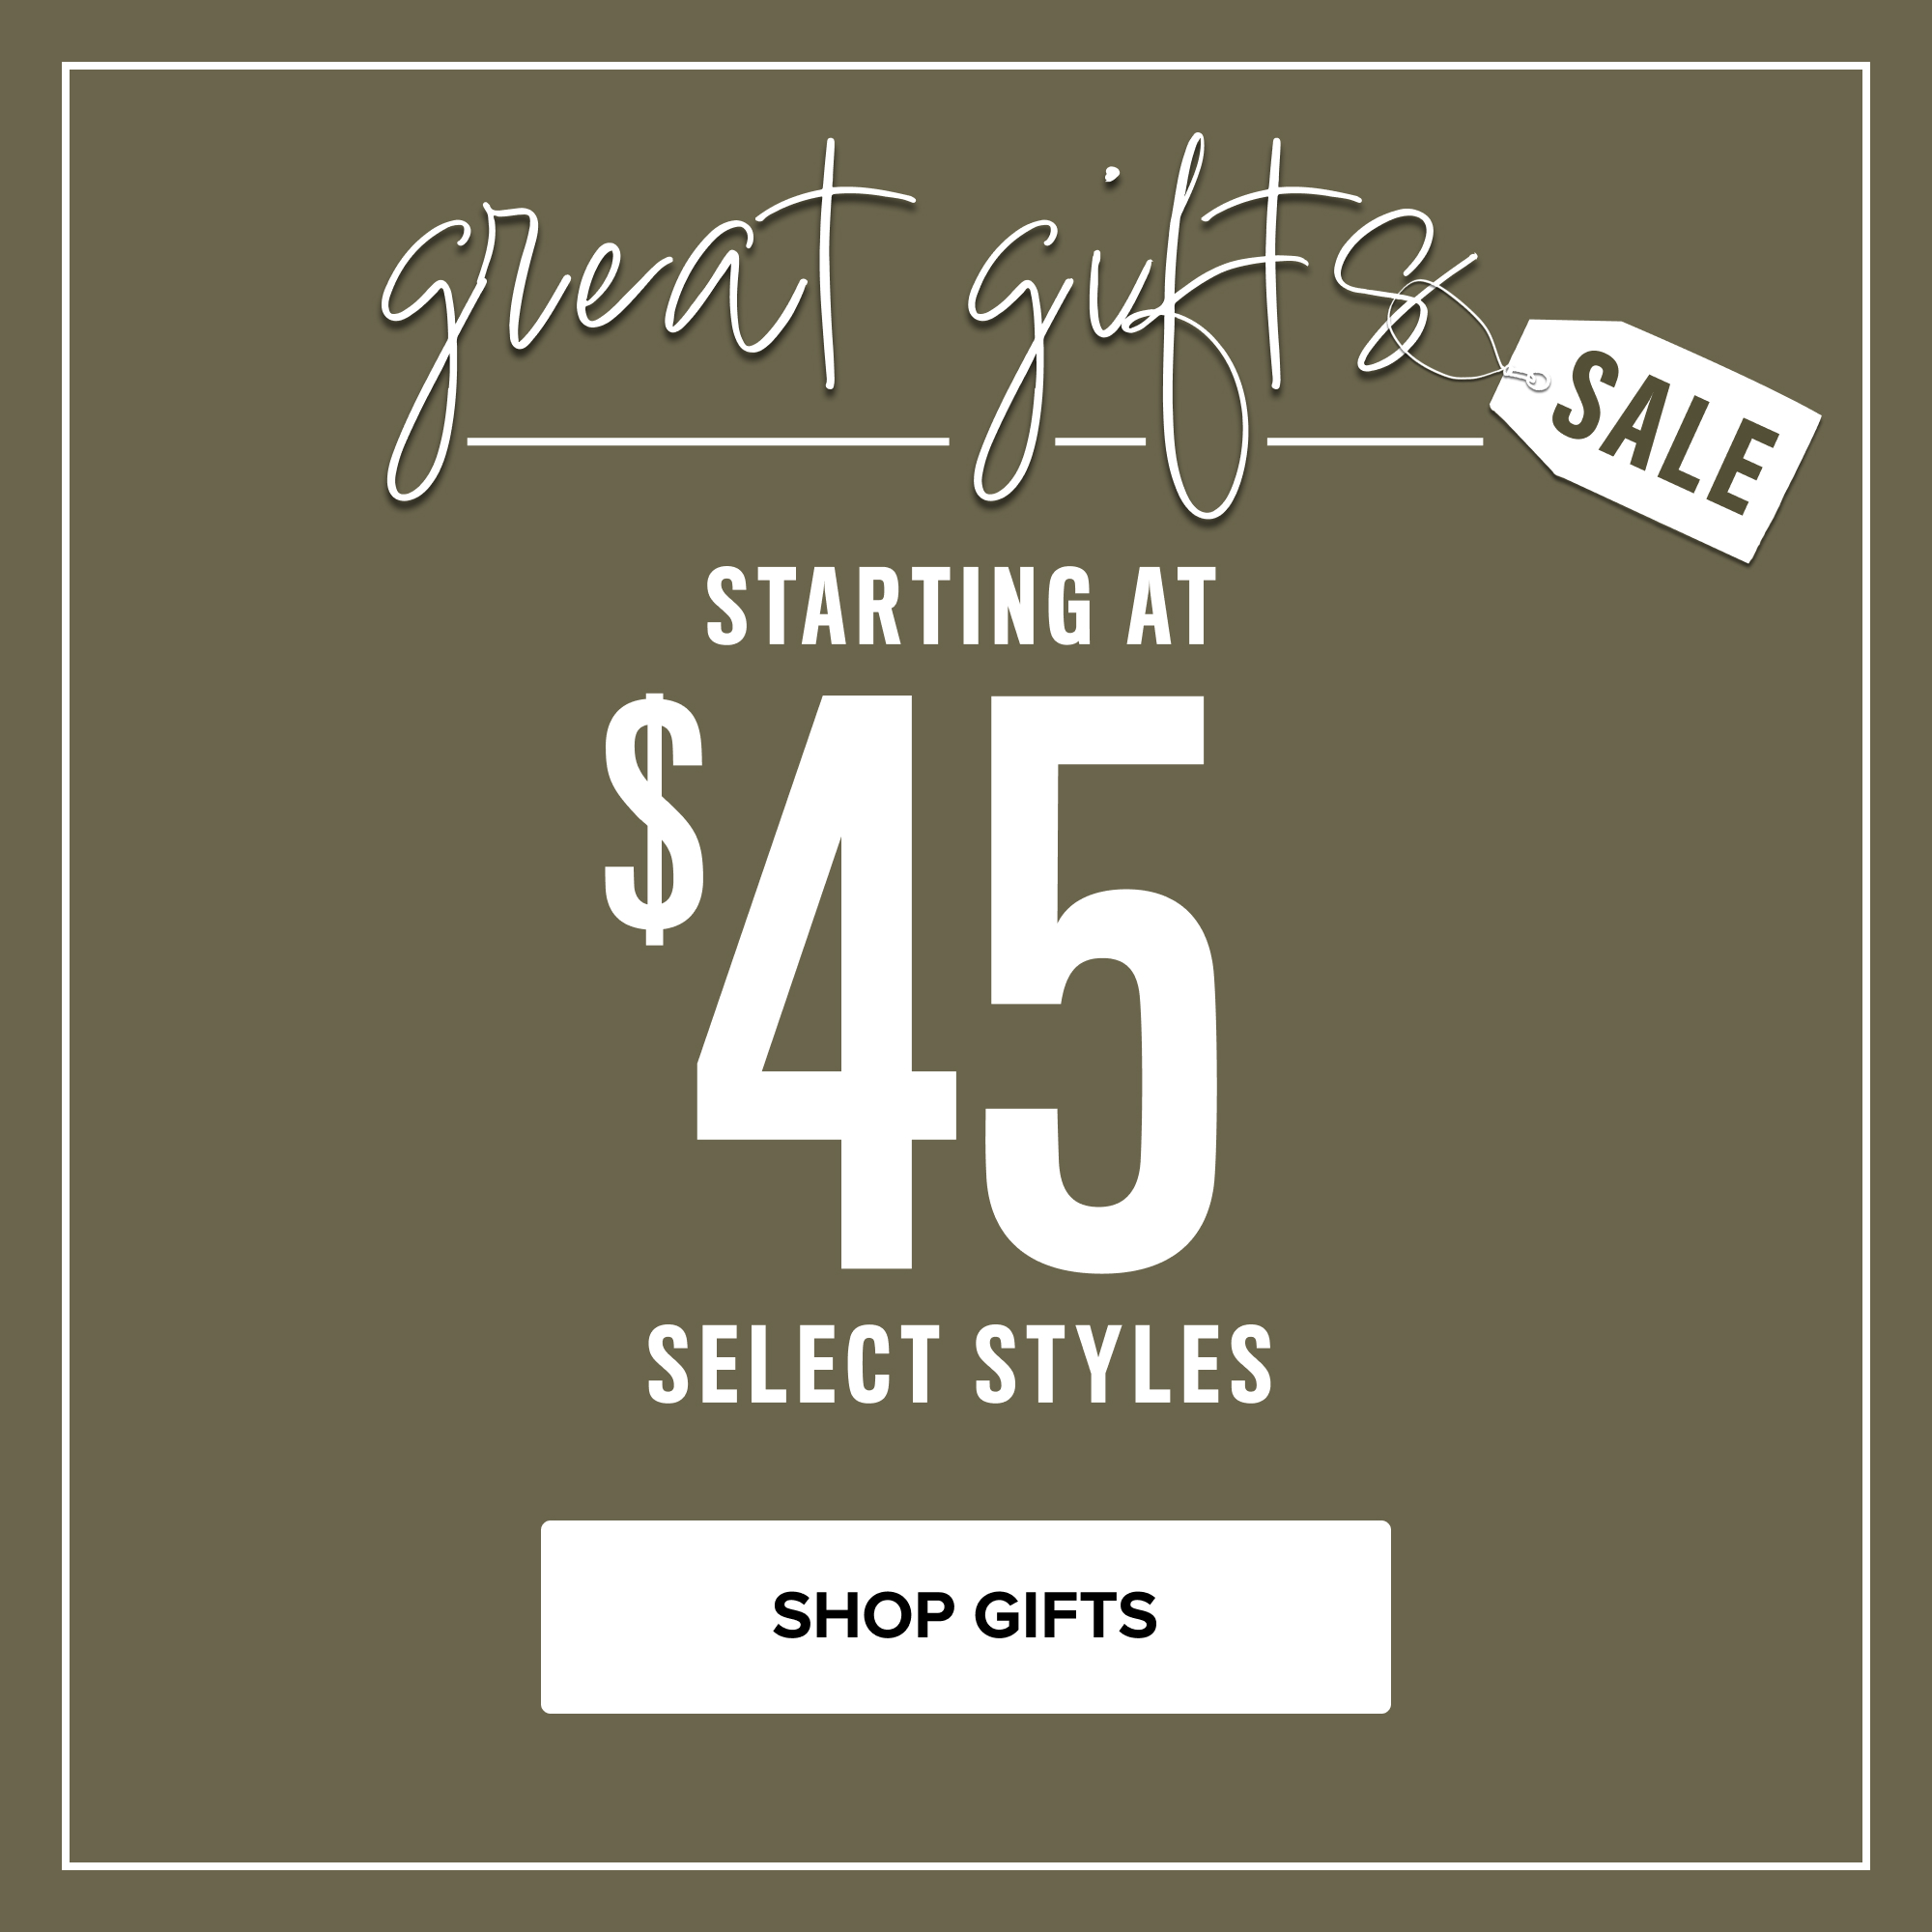 Great Gifts Sale. Starting at $45 select styles.